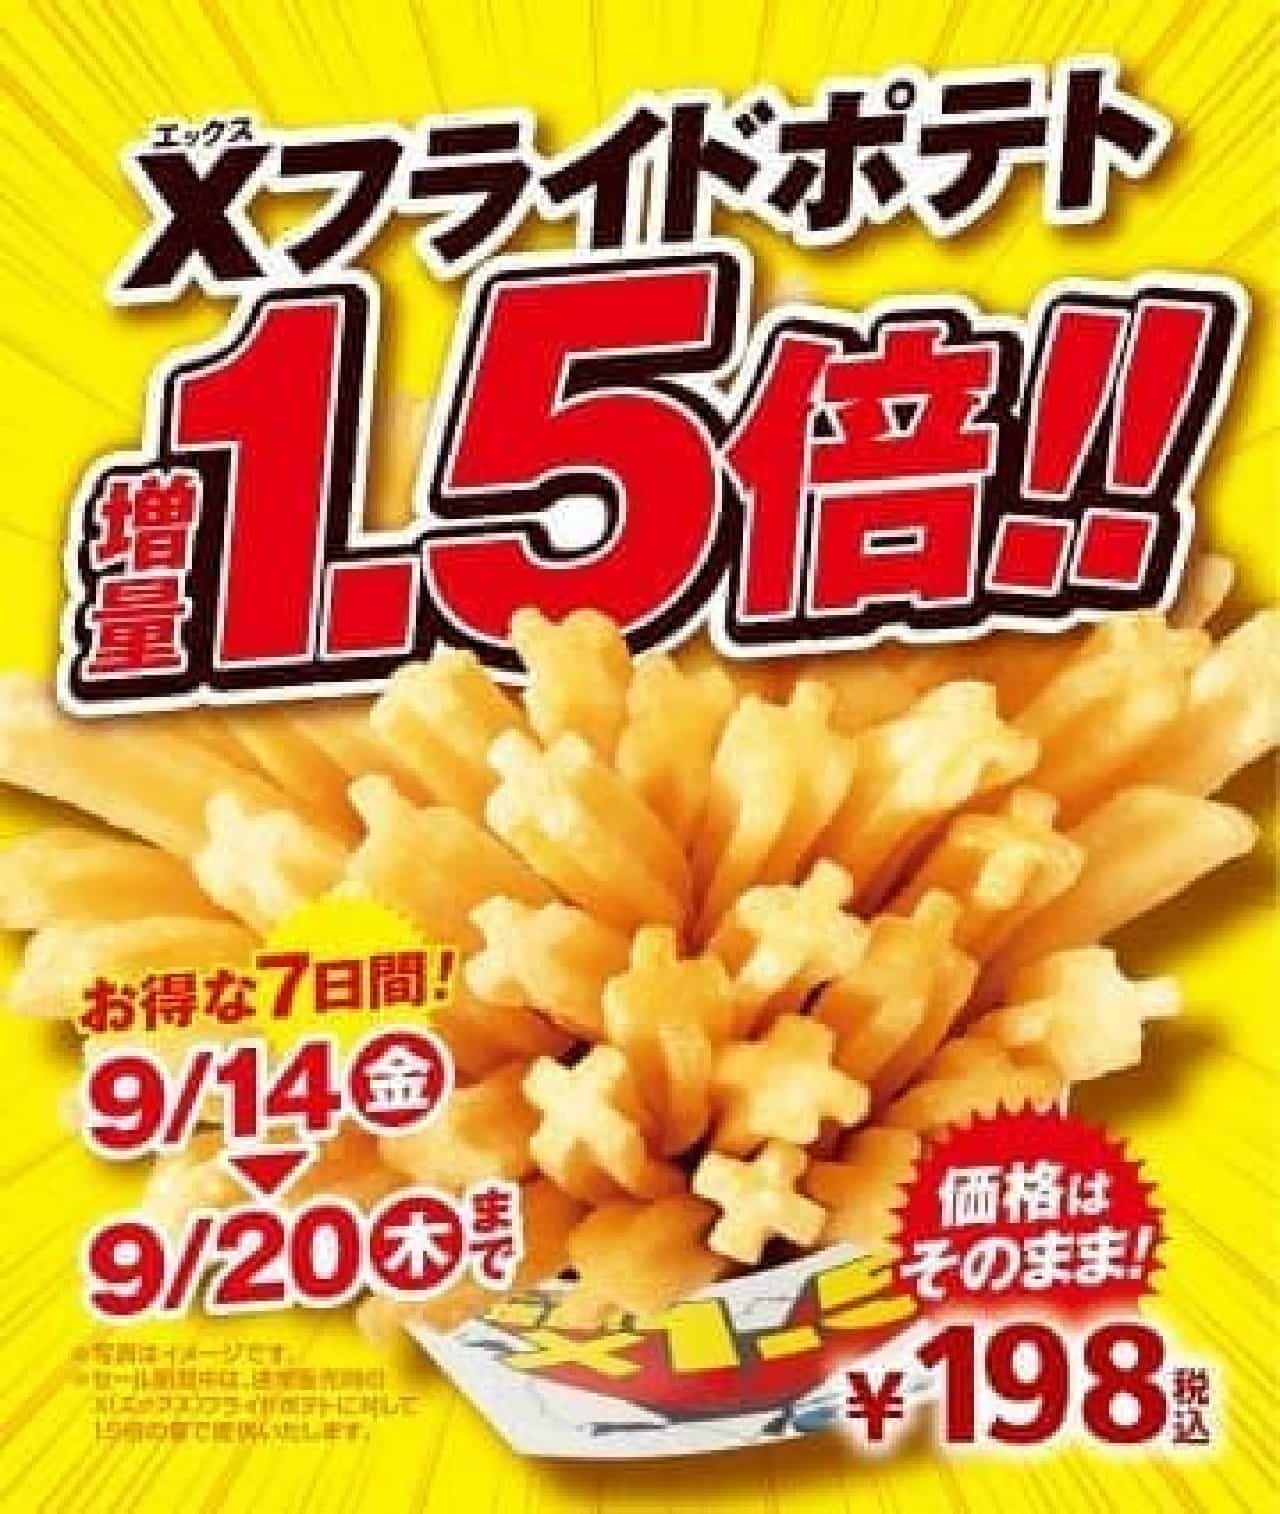 Ministop "X French Fries 1.5x Increase Sale"